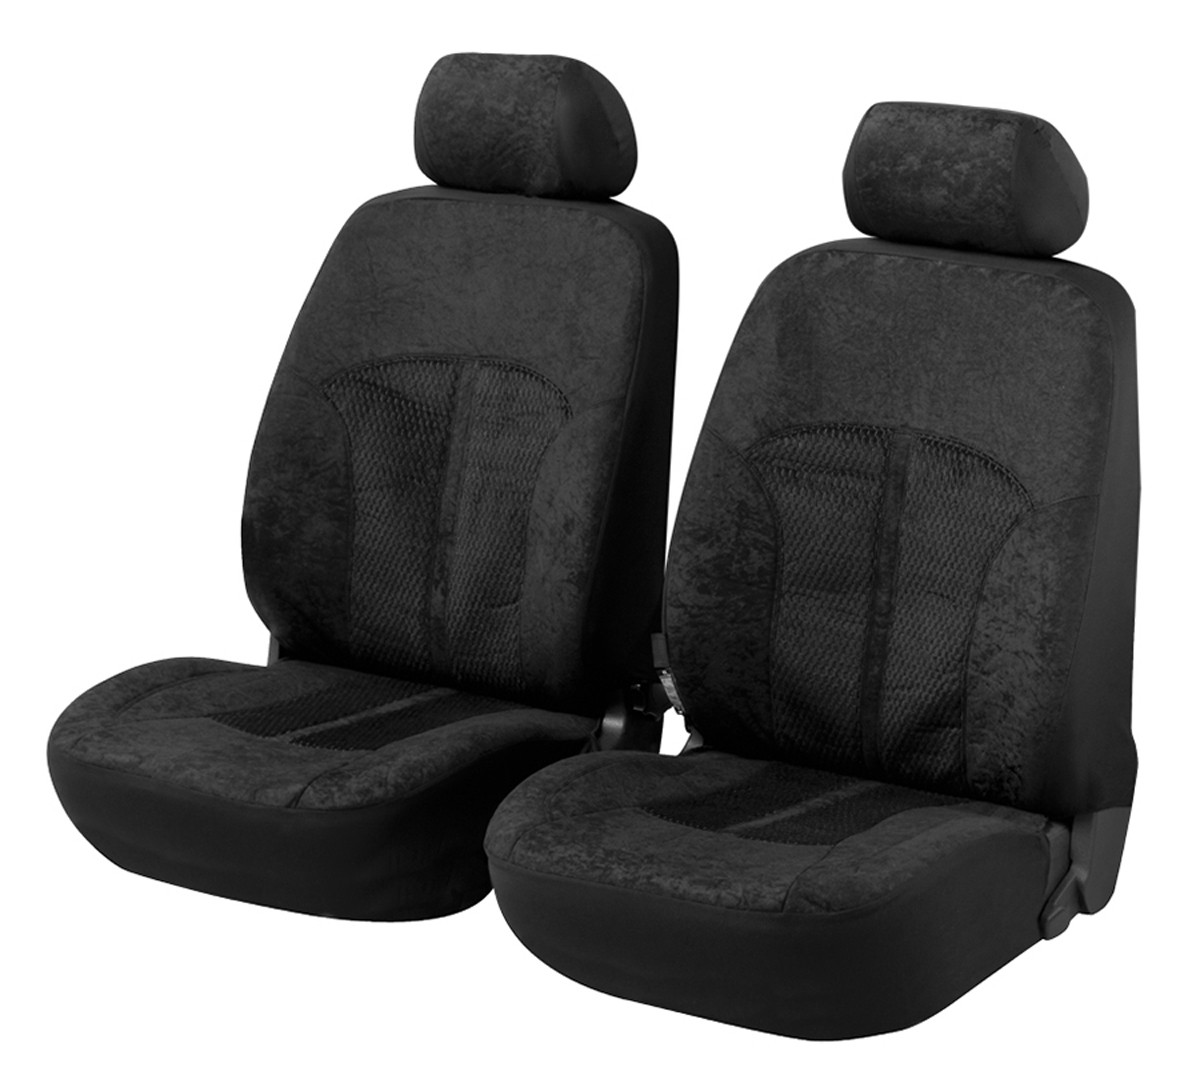 Kia Rio, seat covers, black, front seat set, | carseatcovers24.co.uk